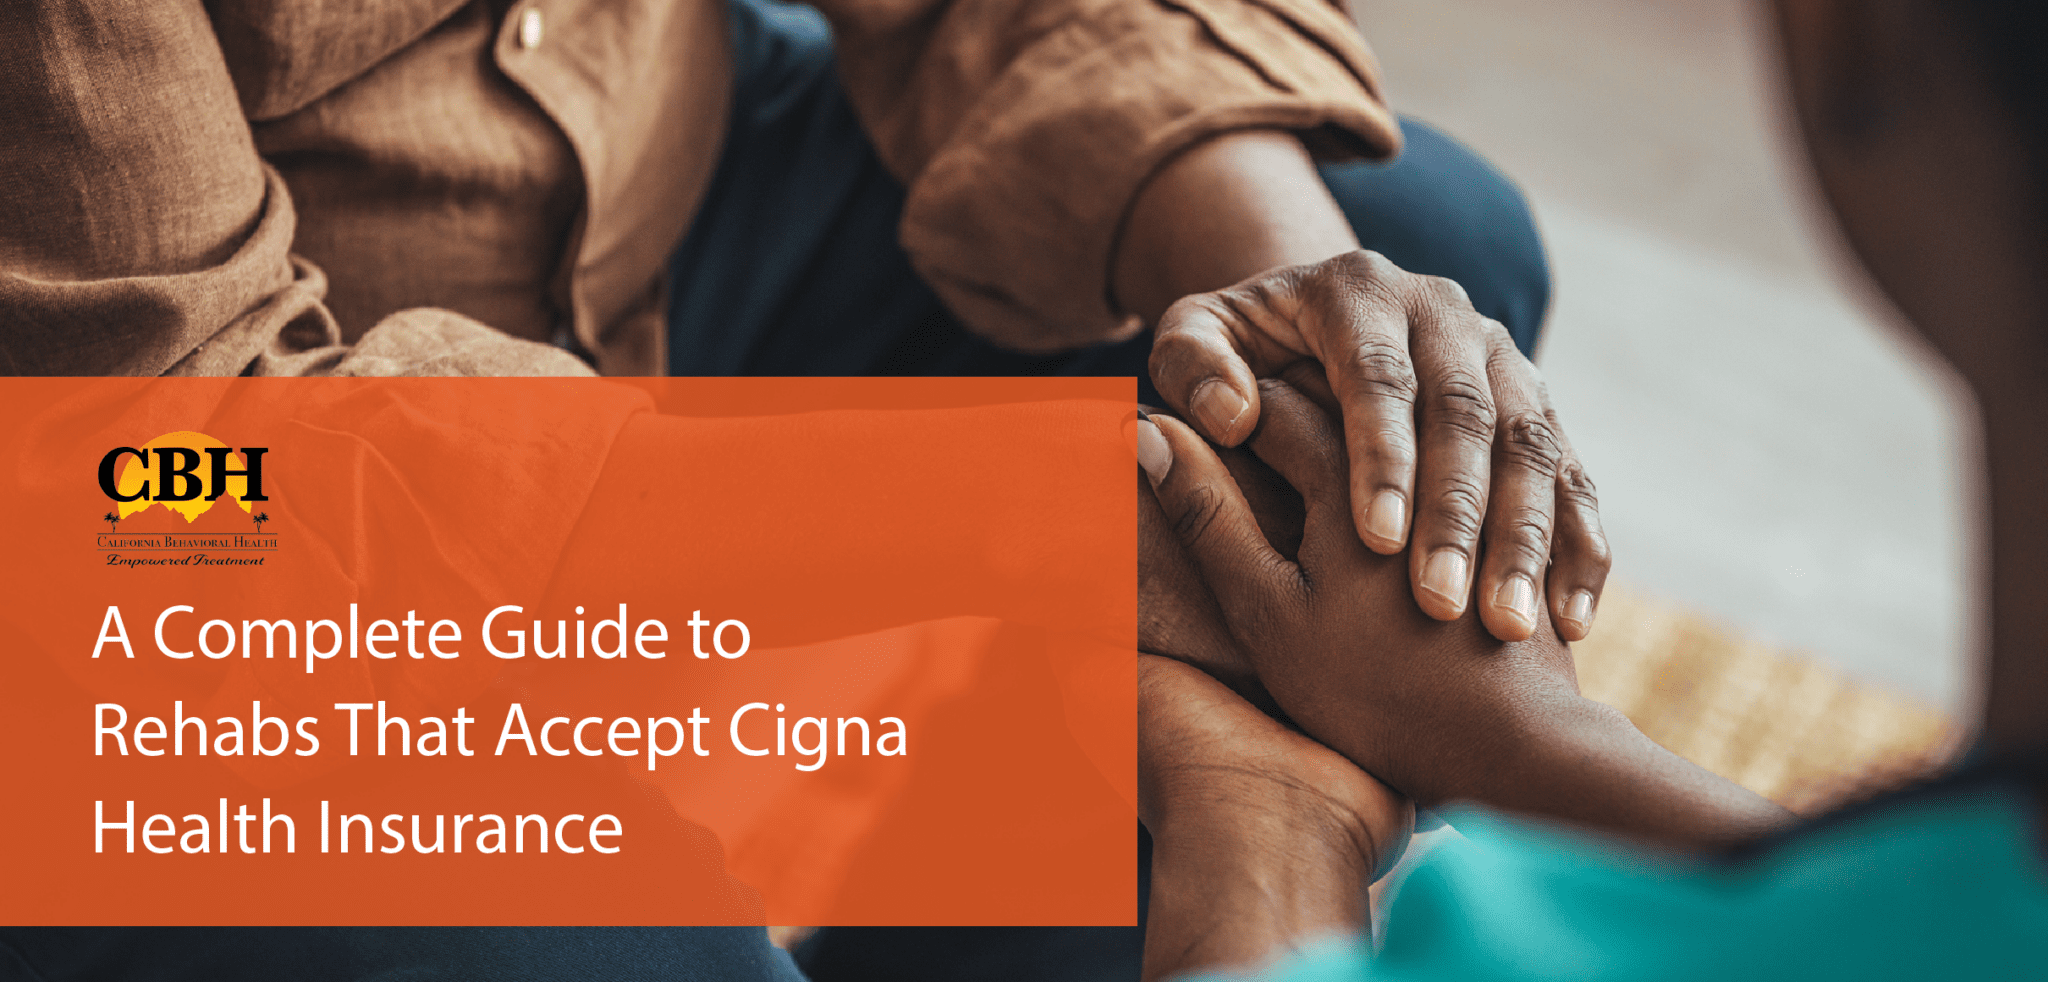 Complete Guide to Rehabs That Accept Cigna